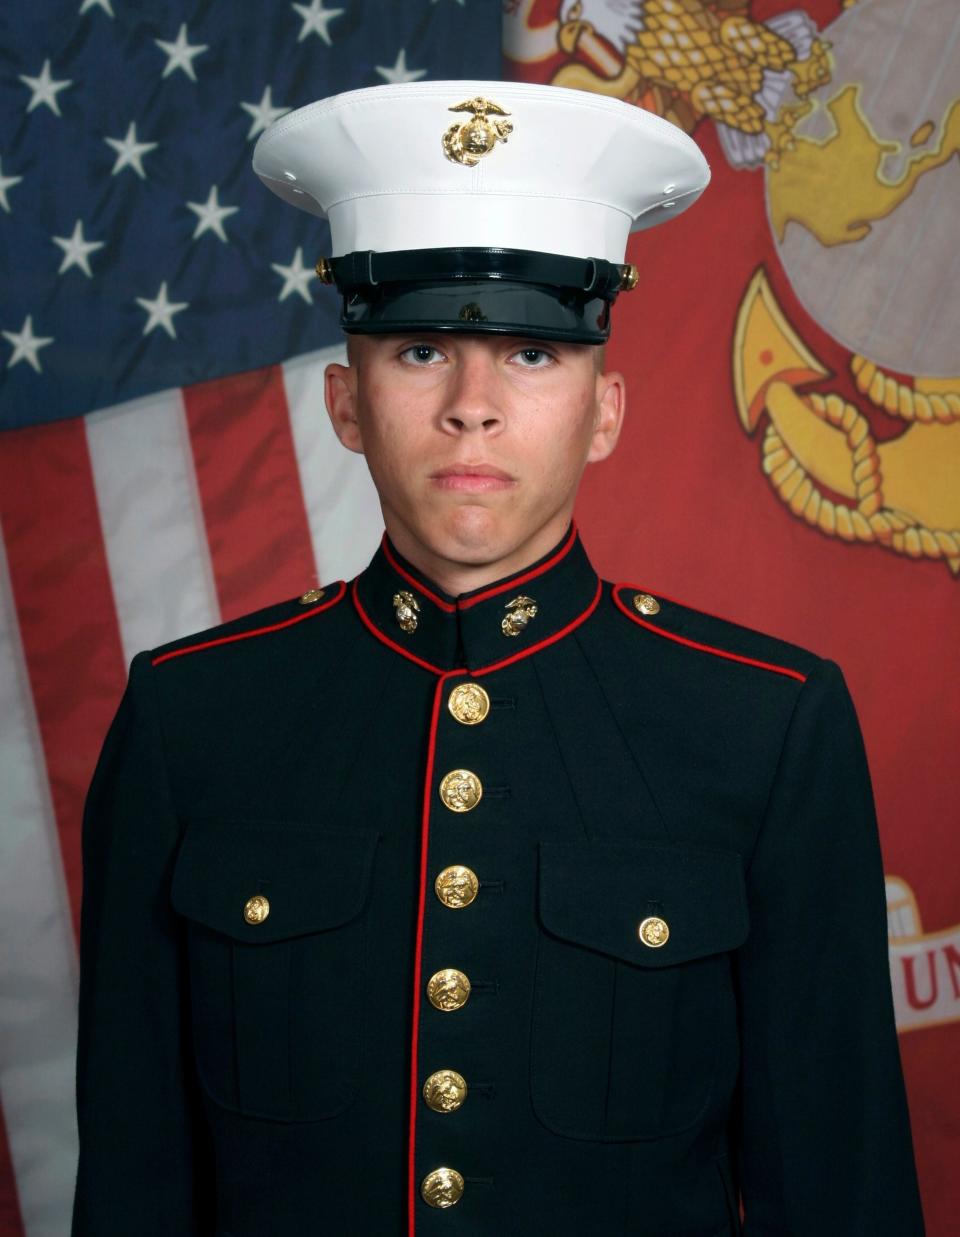 This undated photo released by the 1st Marine Division, Camp Pendleton/U.S. Marines shows Marine Corps Lance Cpl. Dylan R. Merola, 20, of Rancho Cucamonga, Calif.